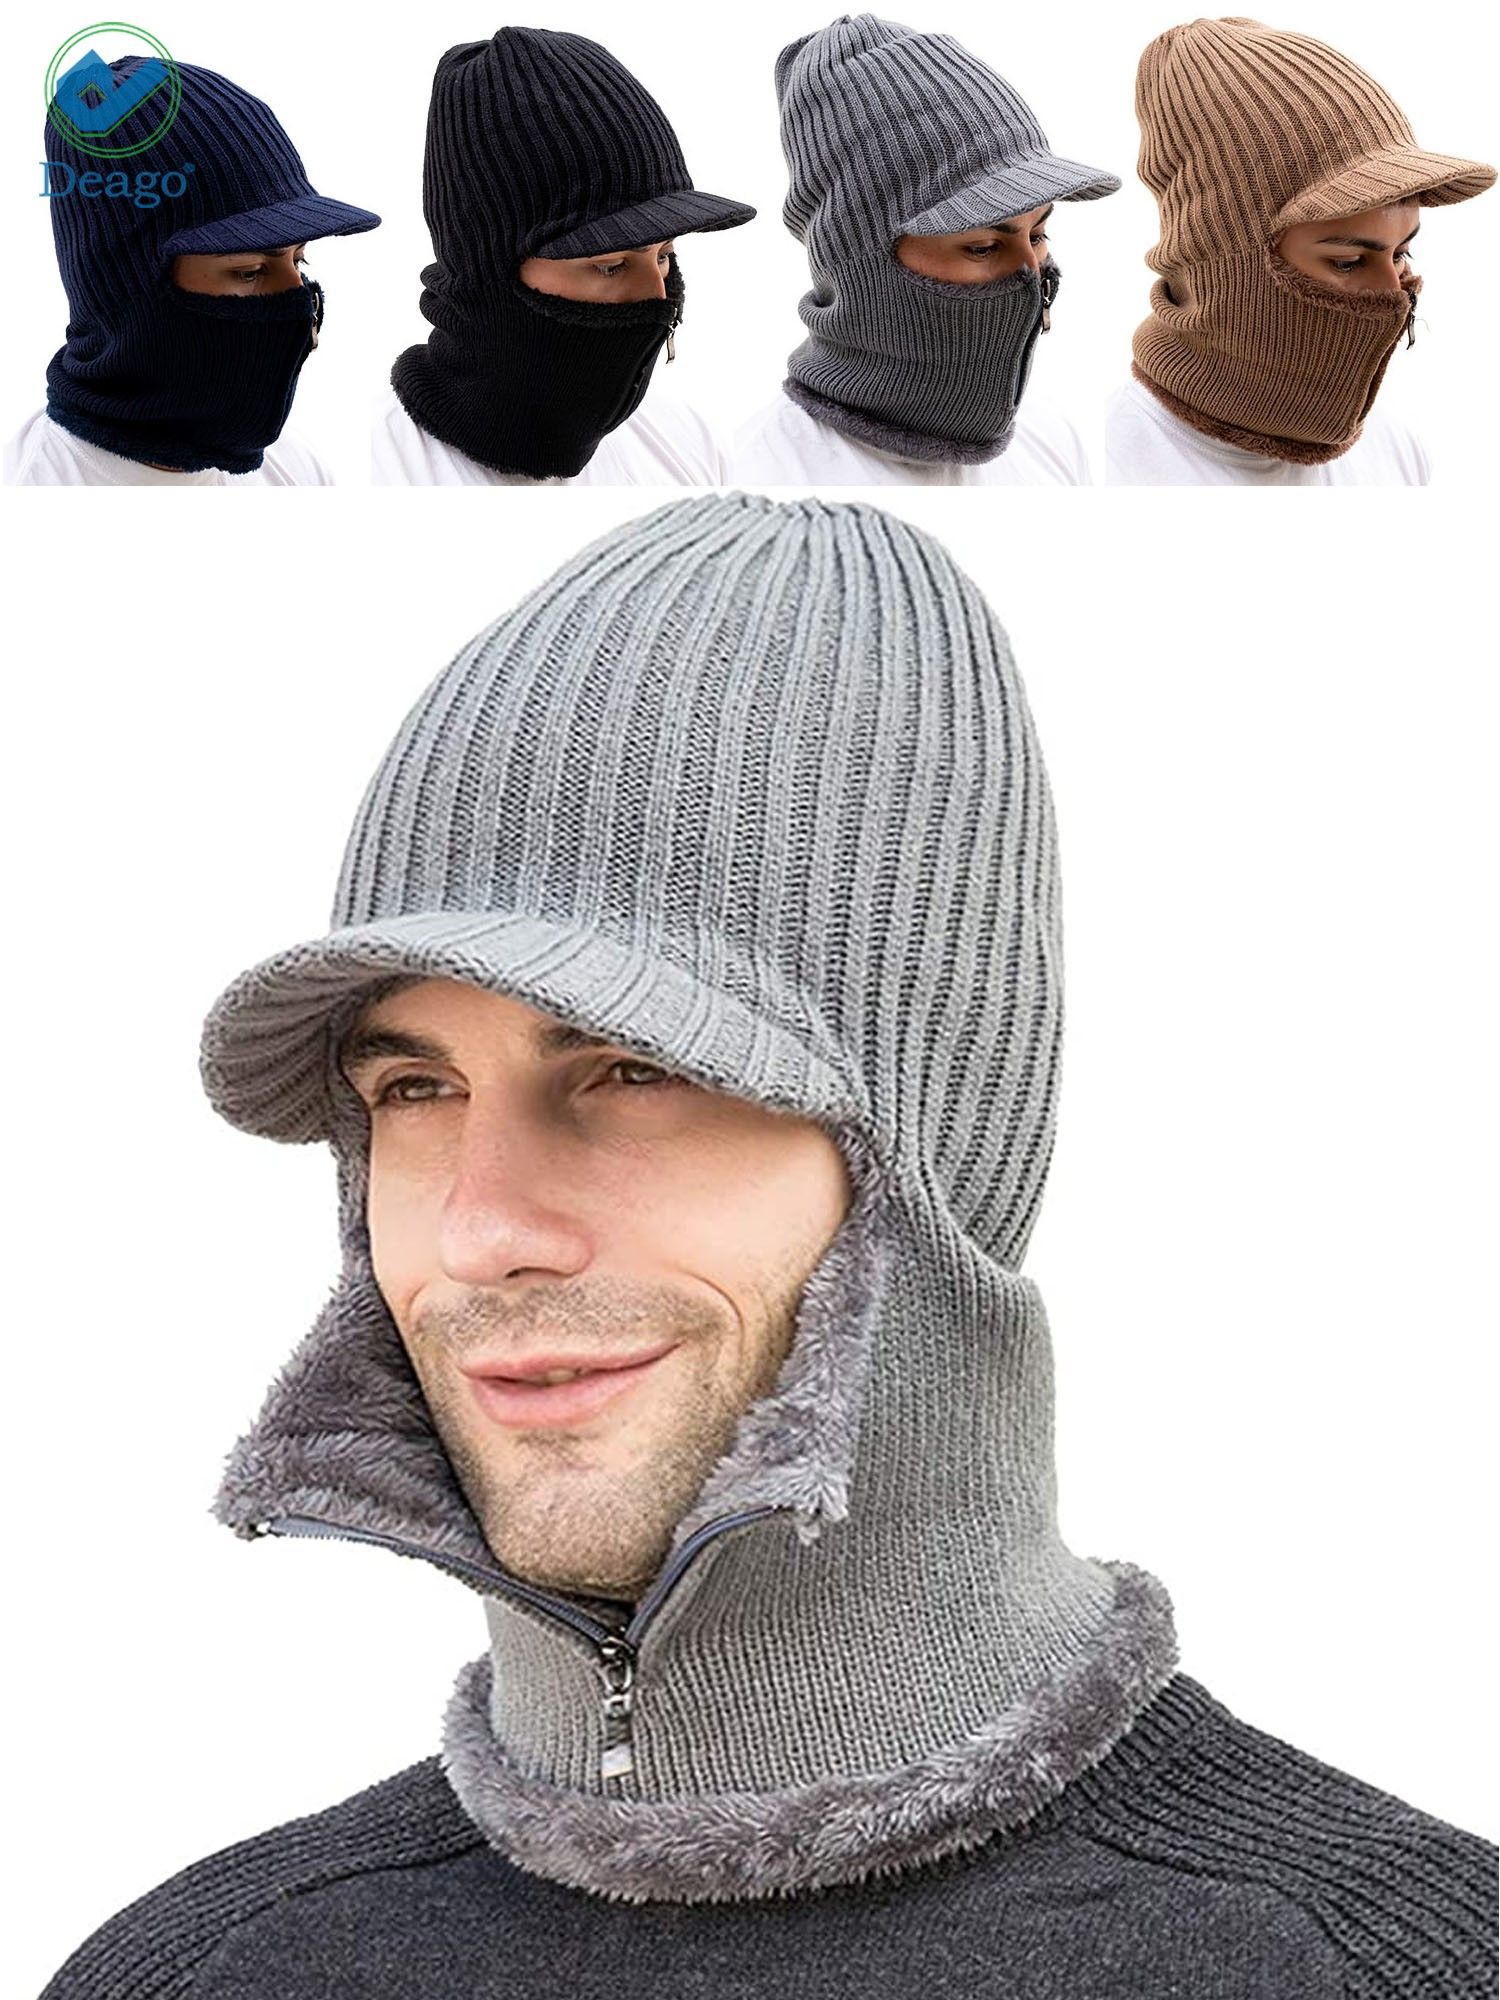 Deago Men Winter Knitted Balaclava Beanie Hat Scarf Set Warm Cycling Ski Mask Neck Warmer with Thick Fleece Lined Zipper Winter Hat & Scarf (Gray) - image 1 of 8